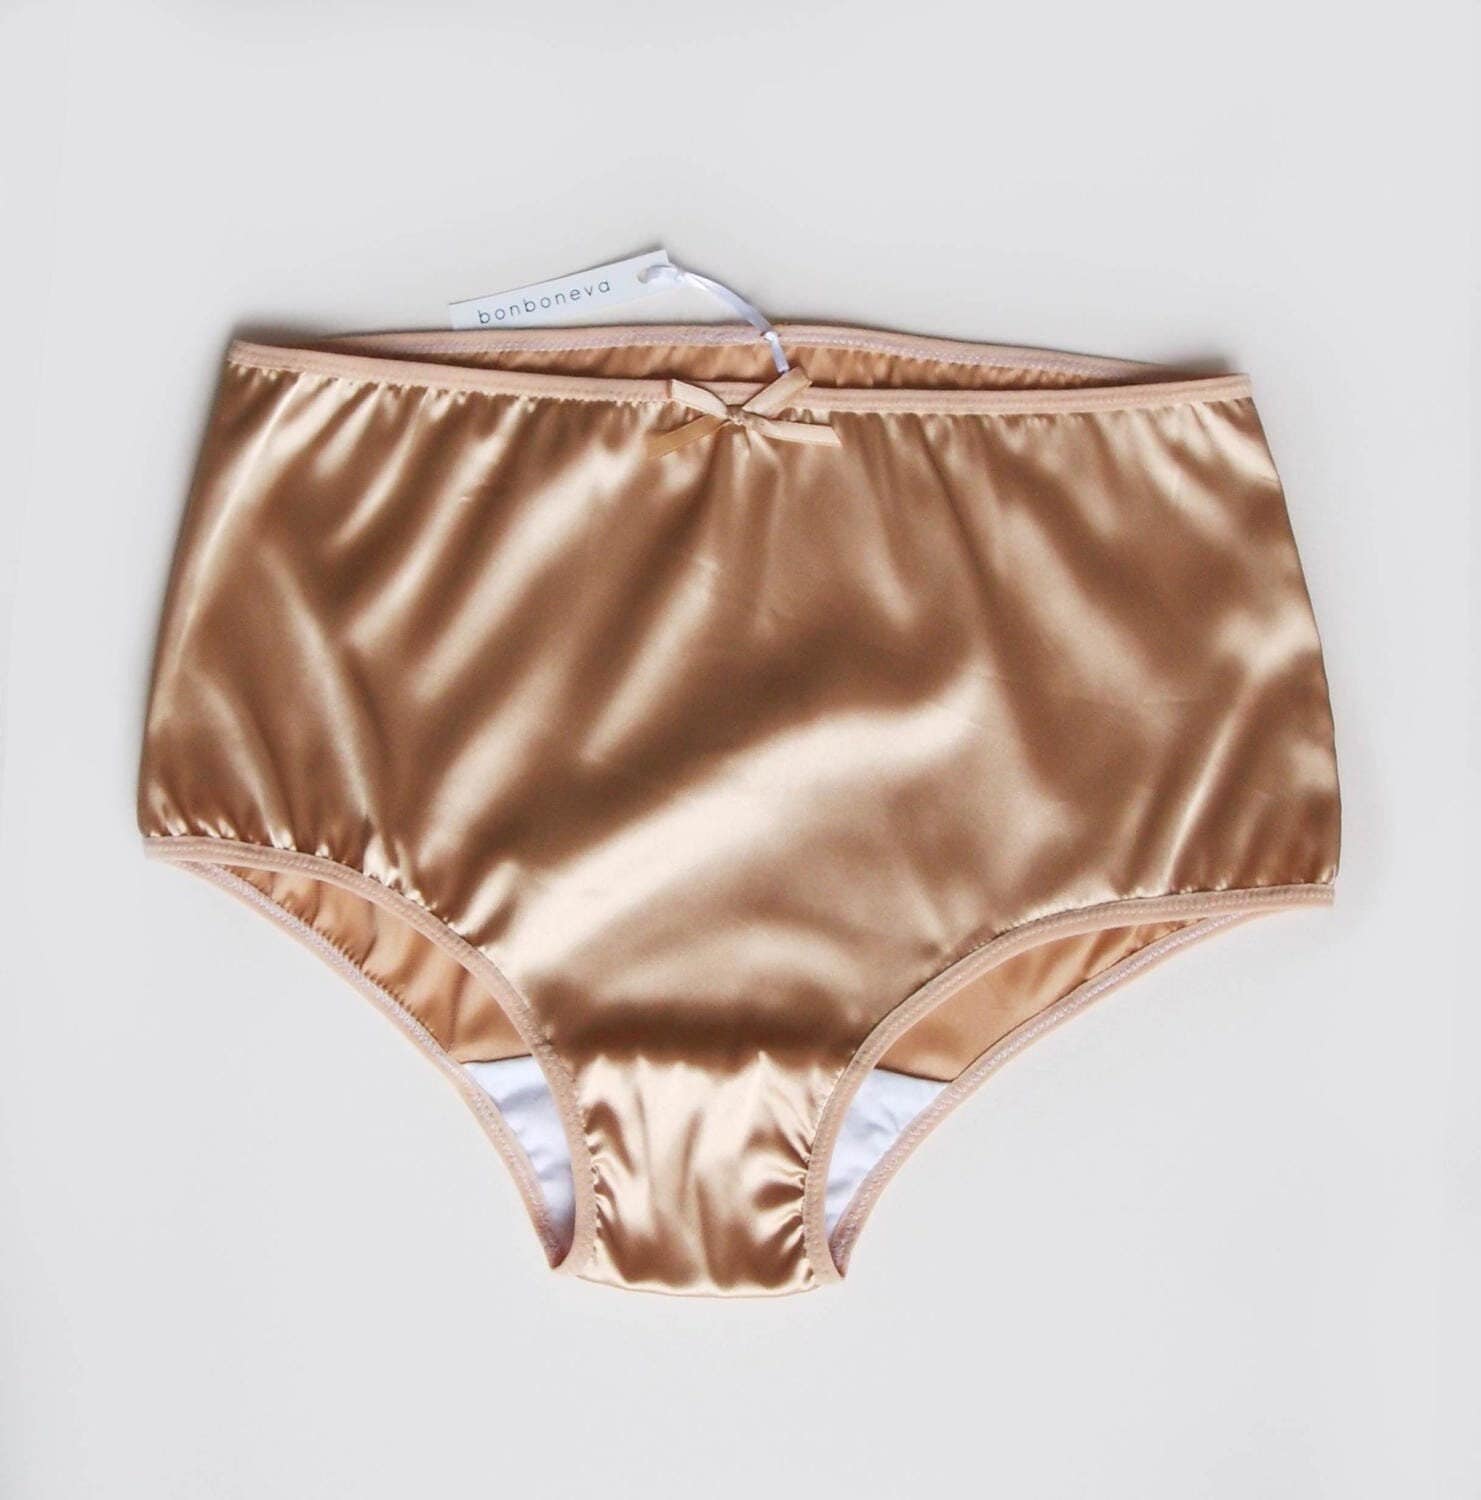 Golden Caramel Anna Satin Panties Retro Feel Sexy Satin Knickers in His and  Hers Options by Bonboneva -  Canada